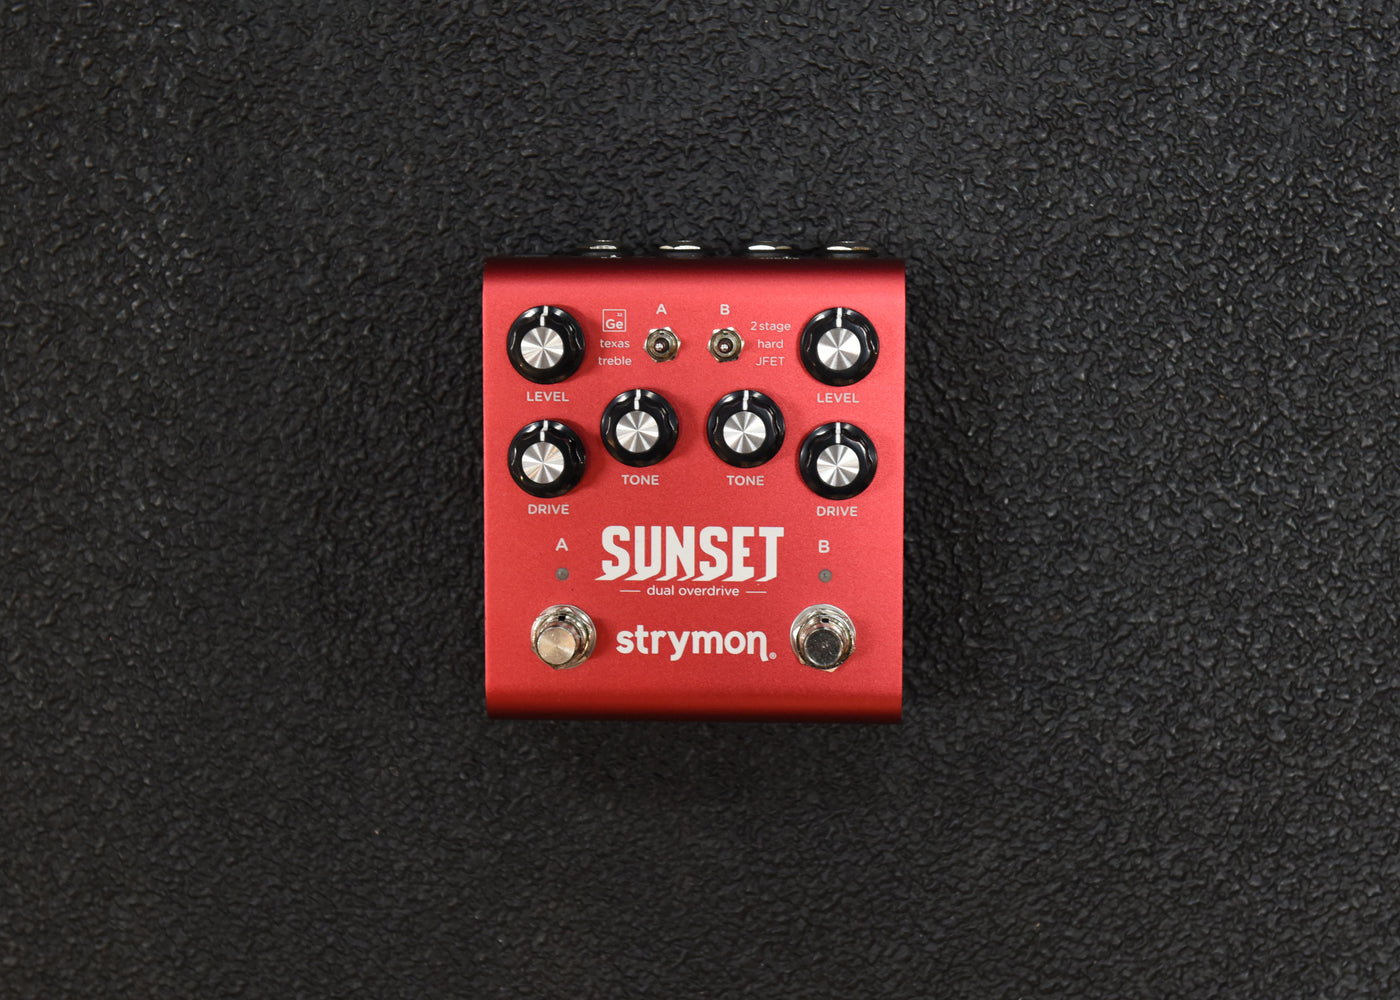 Sunset Dual Overdrive - $299